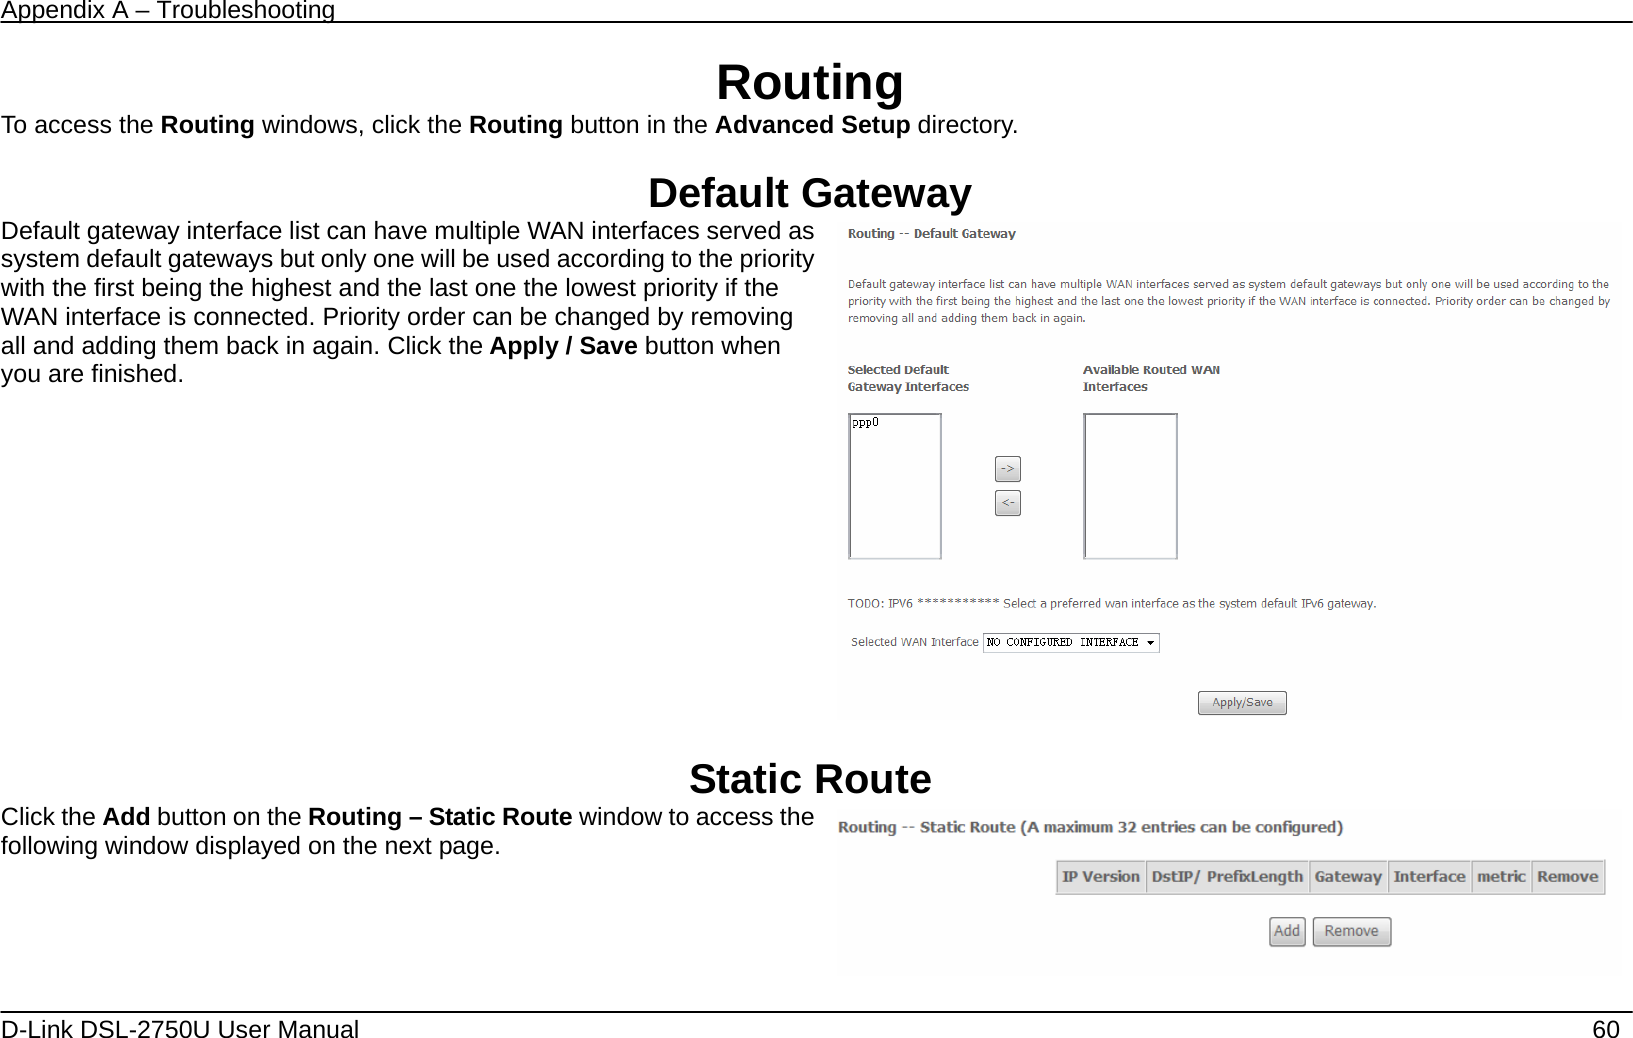 Appendix A – Troubleshooting   D-Link DSL-2750U User Manual    60 Routing To access the Routing windows, click the Routing button in the Advanced Setup directory.  Default Gateway Default gateway interface list can have multiple WAN interfaces served as system default gateways but only one will be used according to the priority with the first being the highest and the last one the lowest priority if the WAN interface is connected. Priority order can be changed by removing all and adding them back in again. Click the Apply / Save button when you are finished.     Static Route Click the Add button on the Routing – Static Route window to access the following window displayed on the next page.     